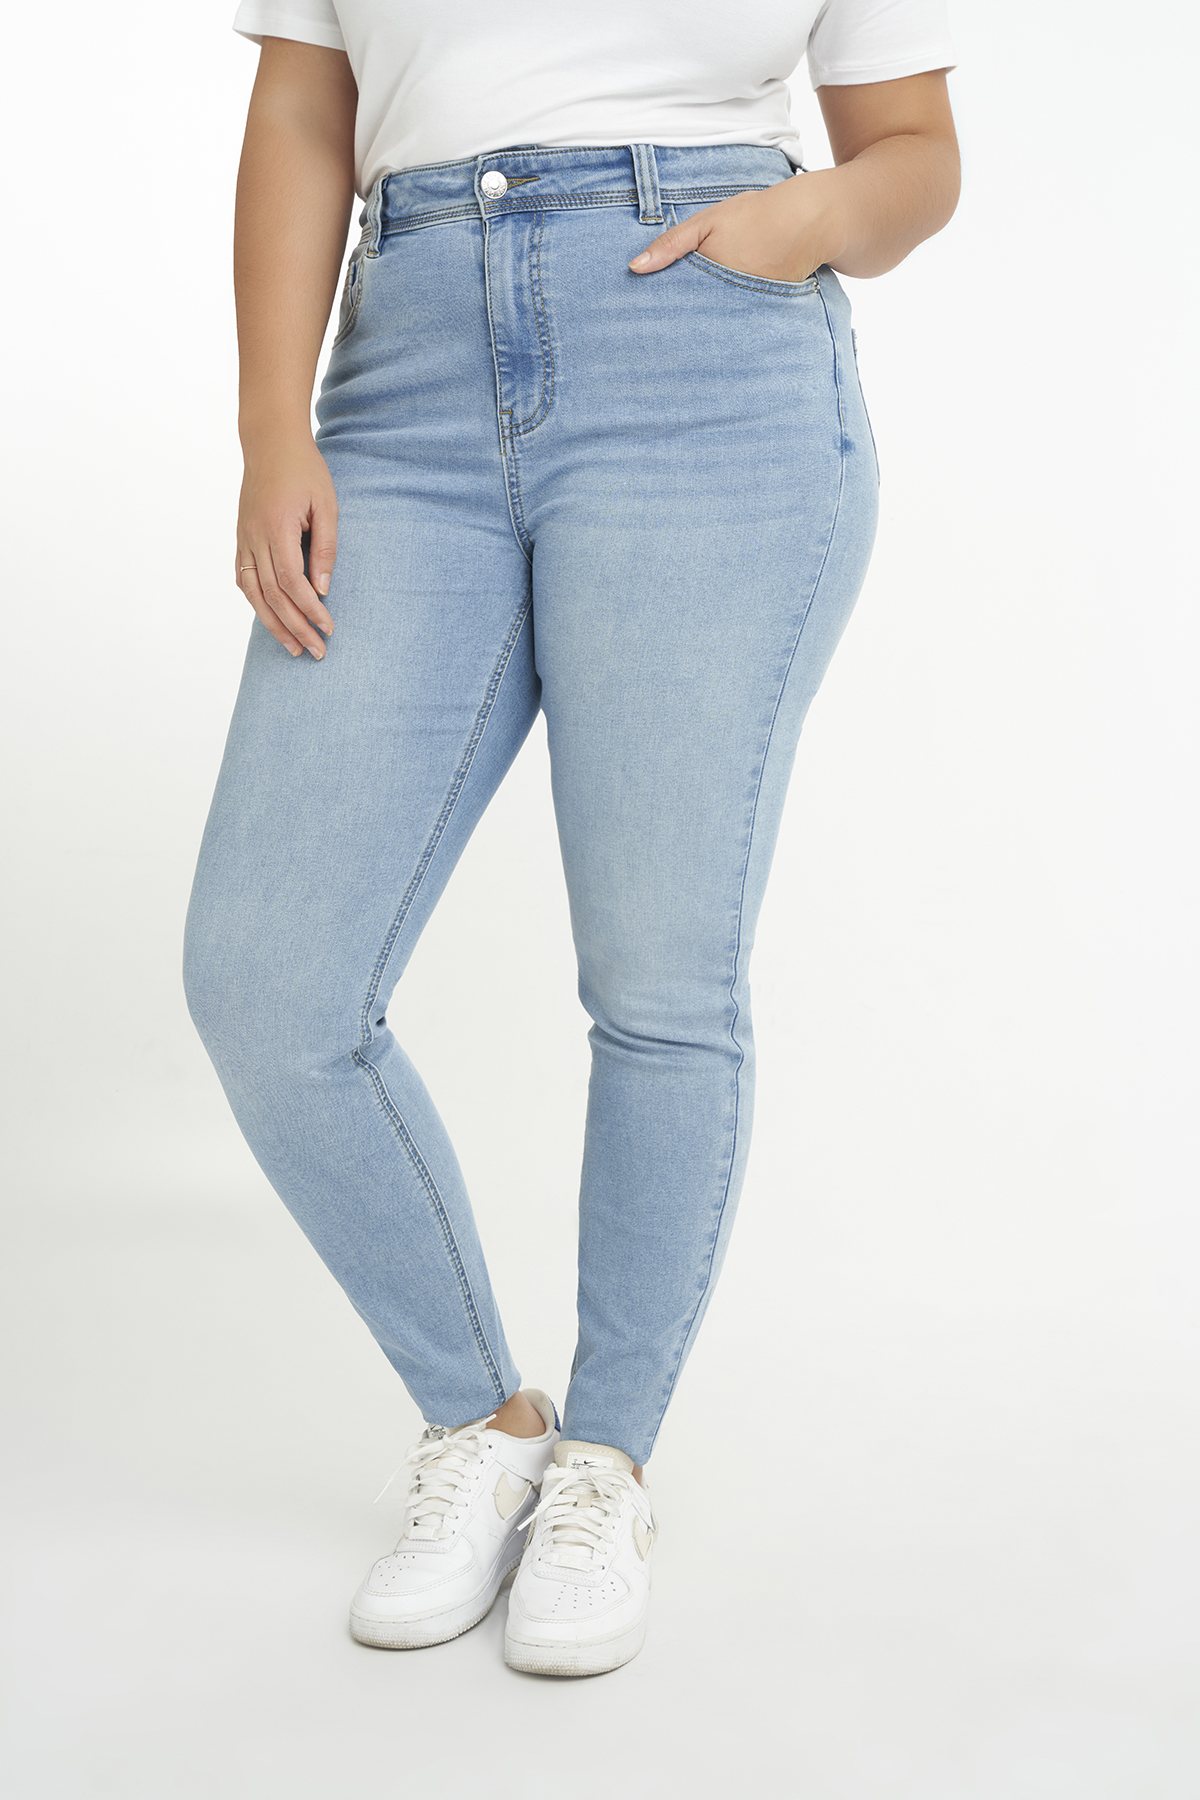 Skinny-Leg-Jeans mit hoher Taille CHERRY image 4